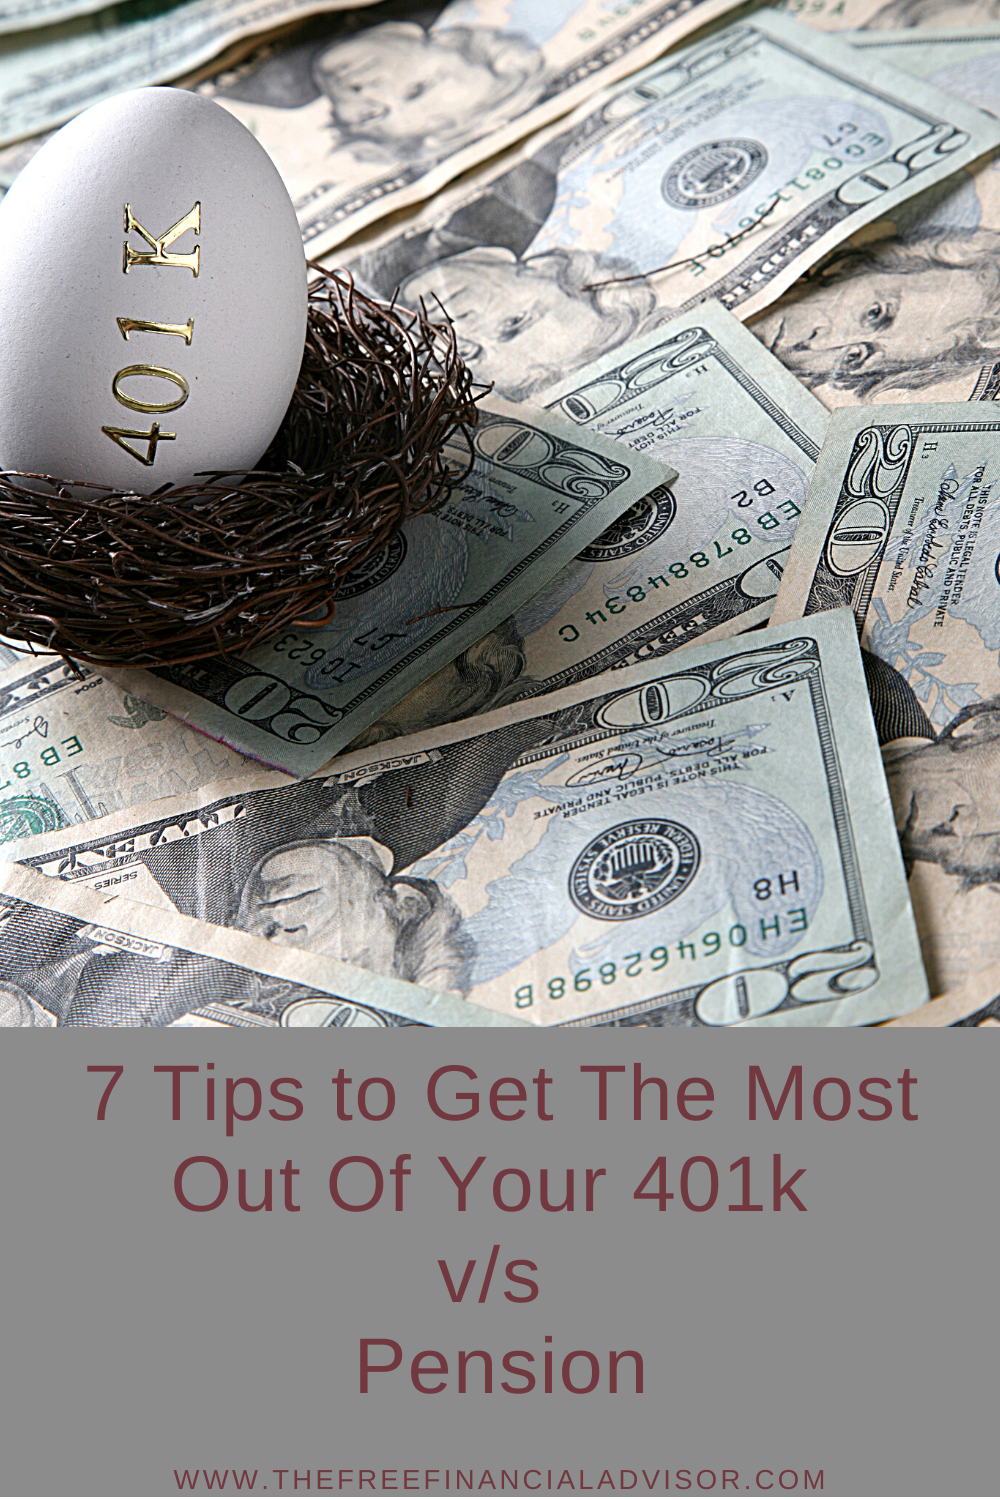 7 Tips to Get The Most Out Of Your 401k vs Pension